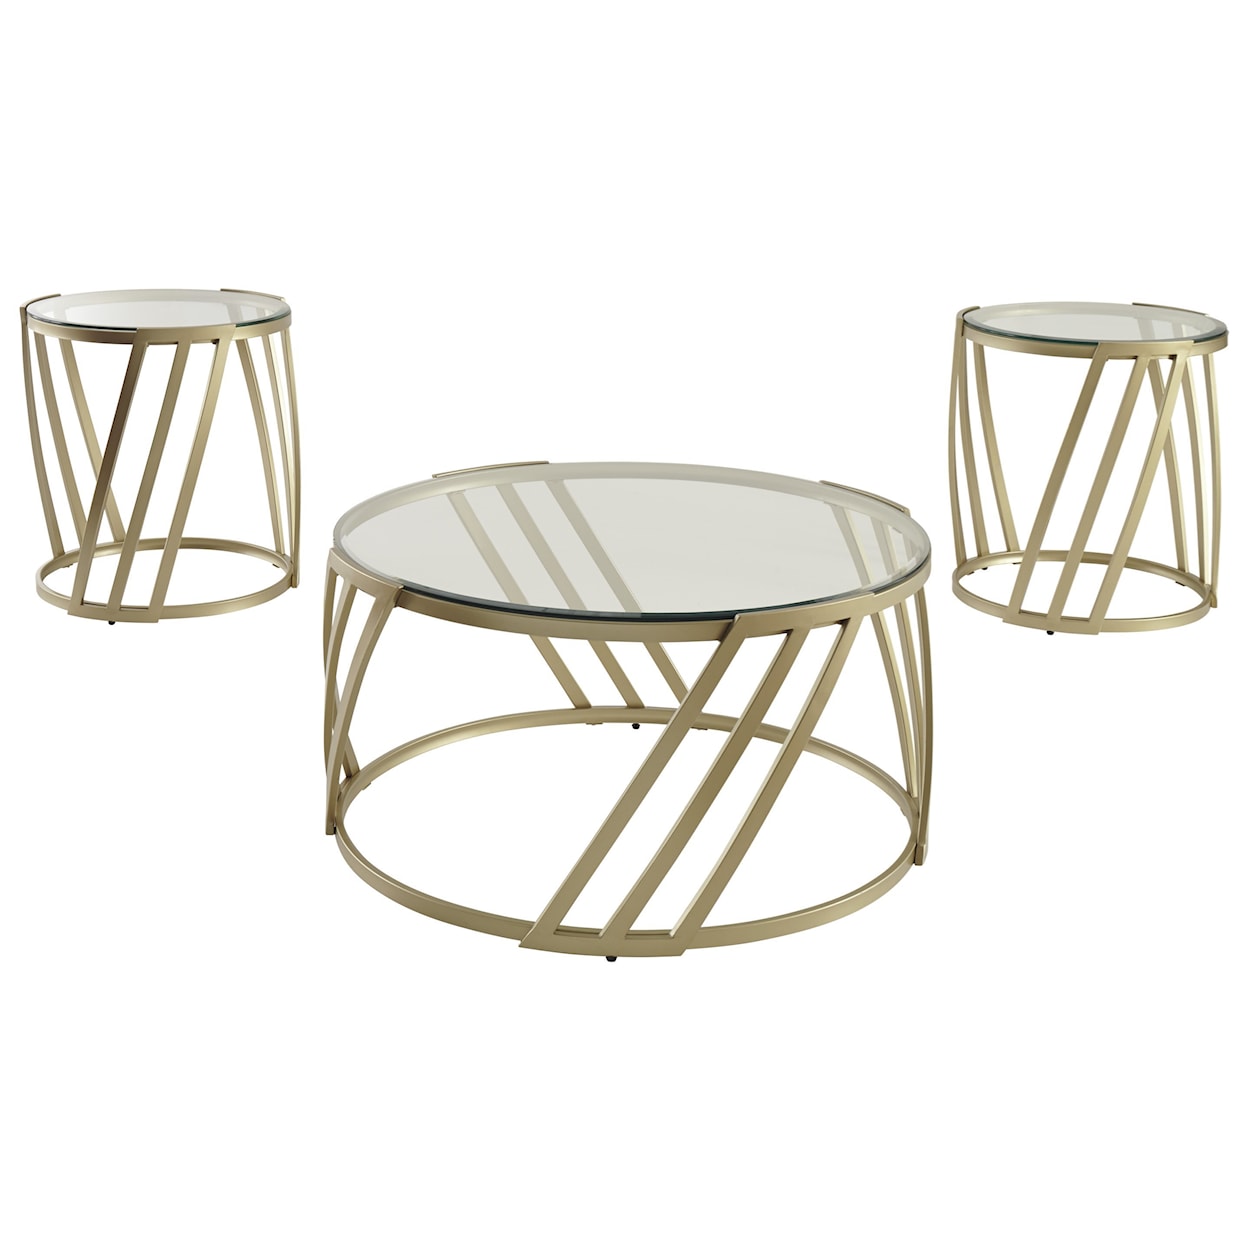 Signature Design by Ashley Austiny 3 Piece Occasional Table Set